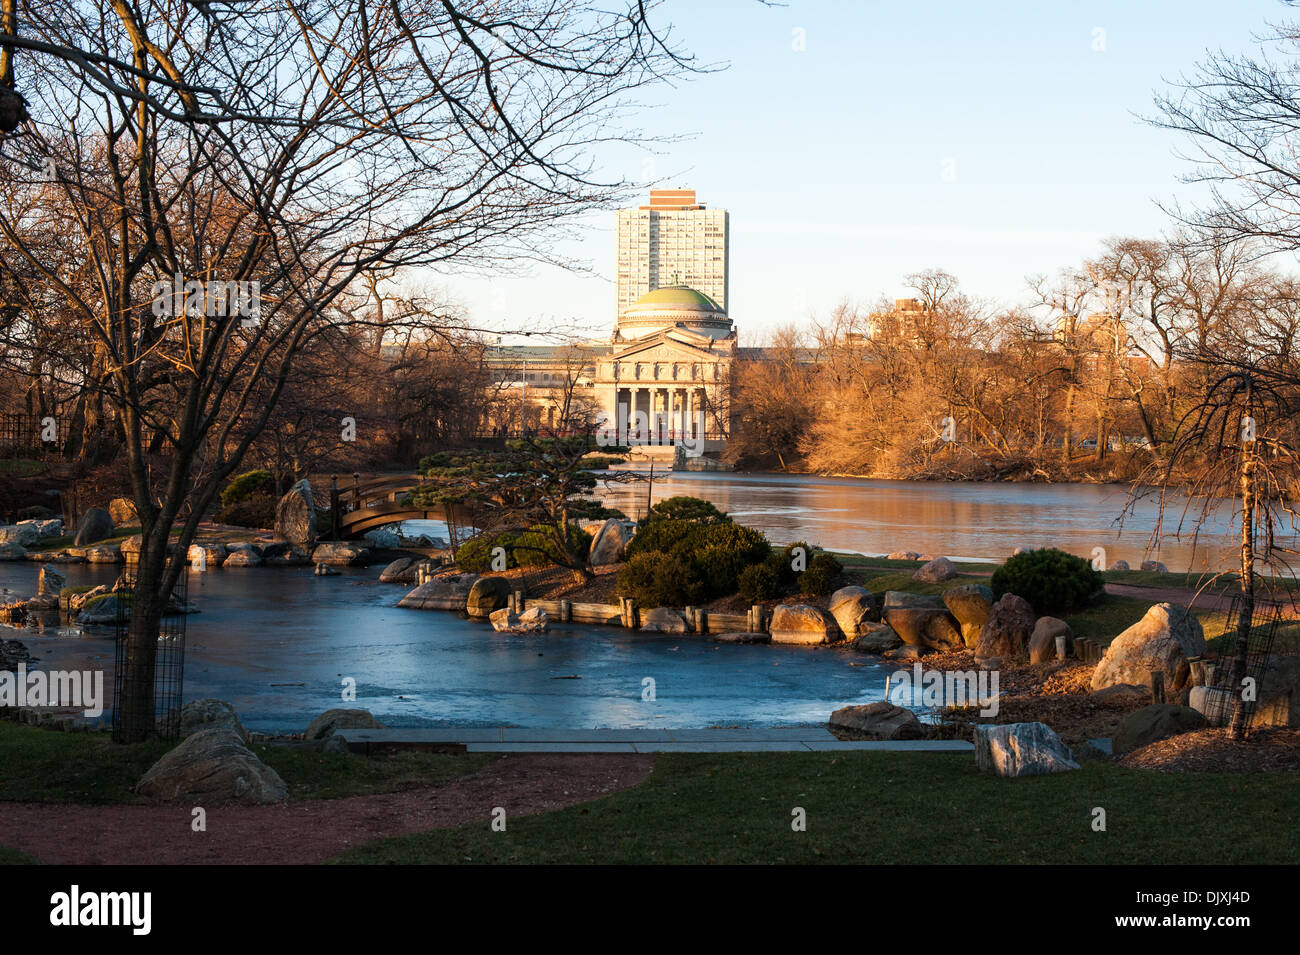 View of Osaka Garden in Jackson Park with the Museum of Science and Industry in the background. Stock Photo